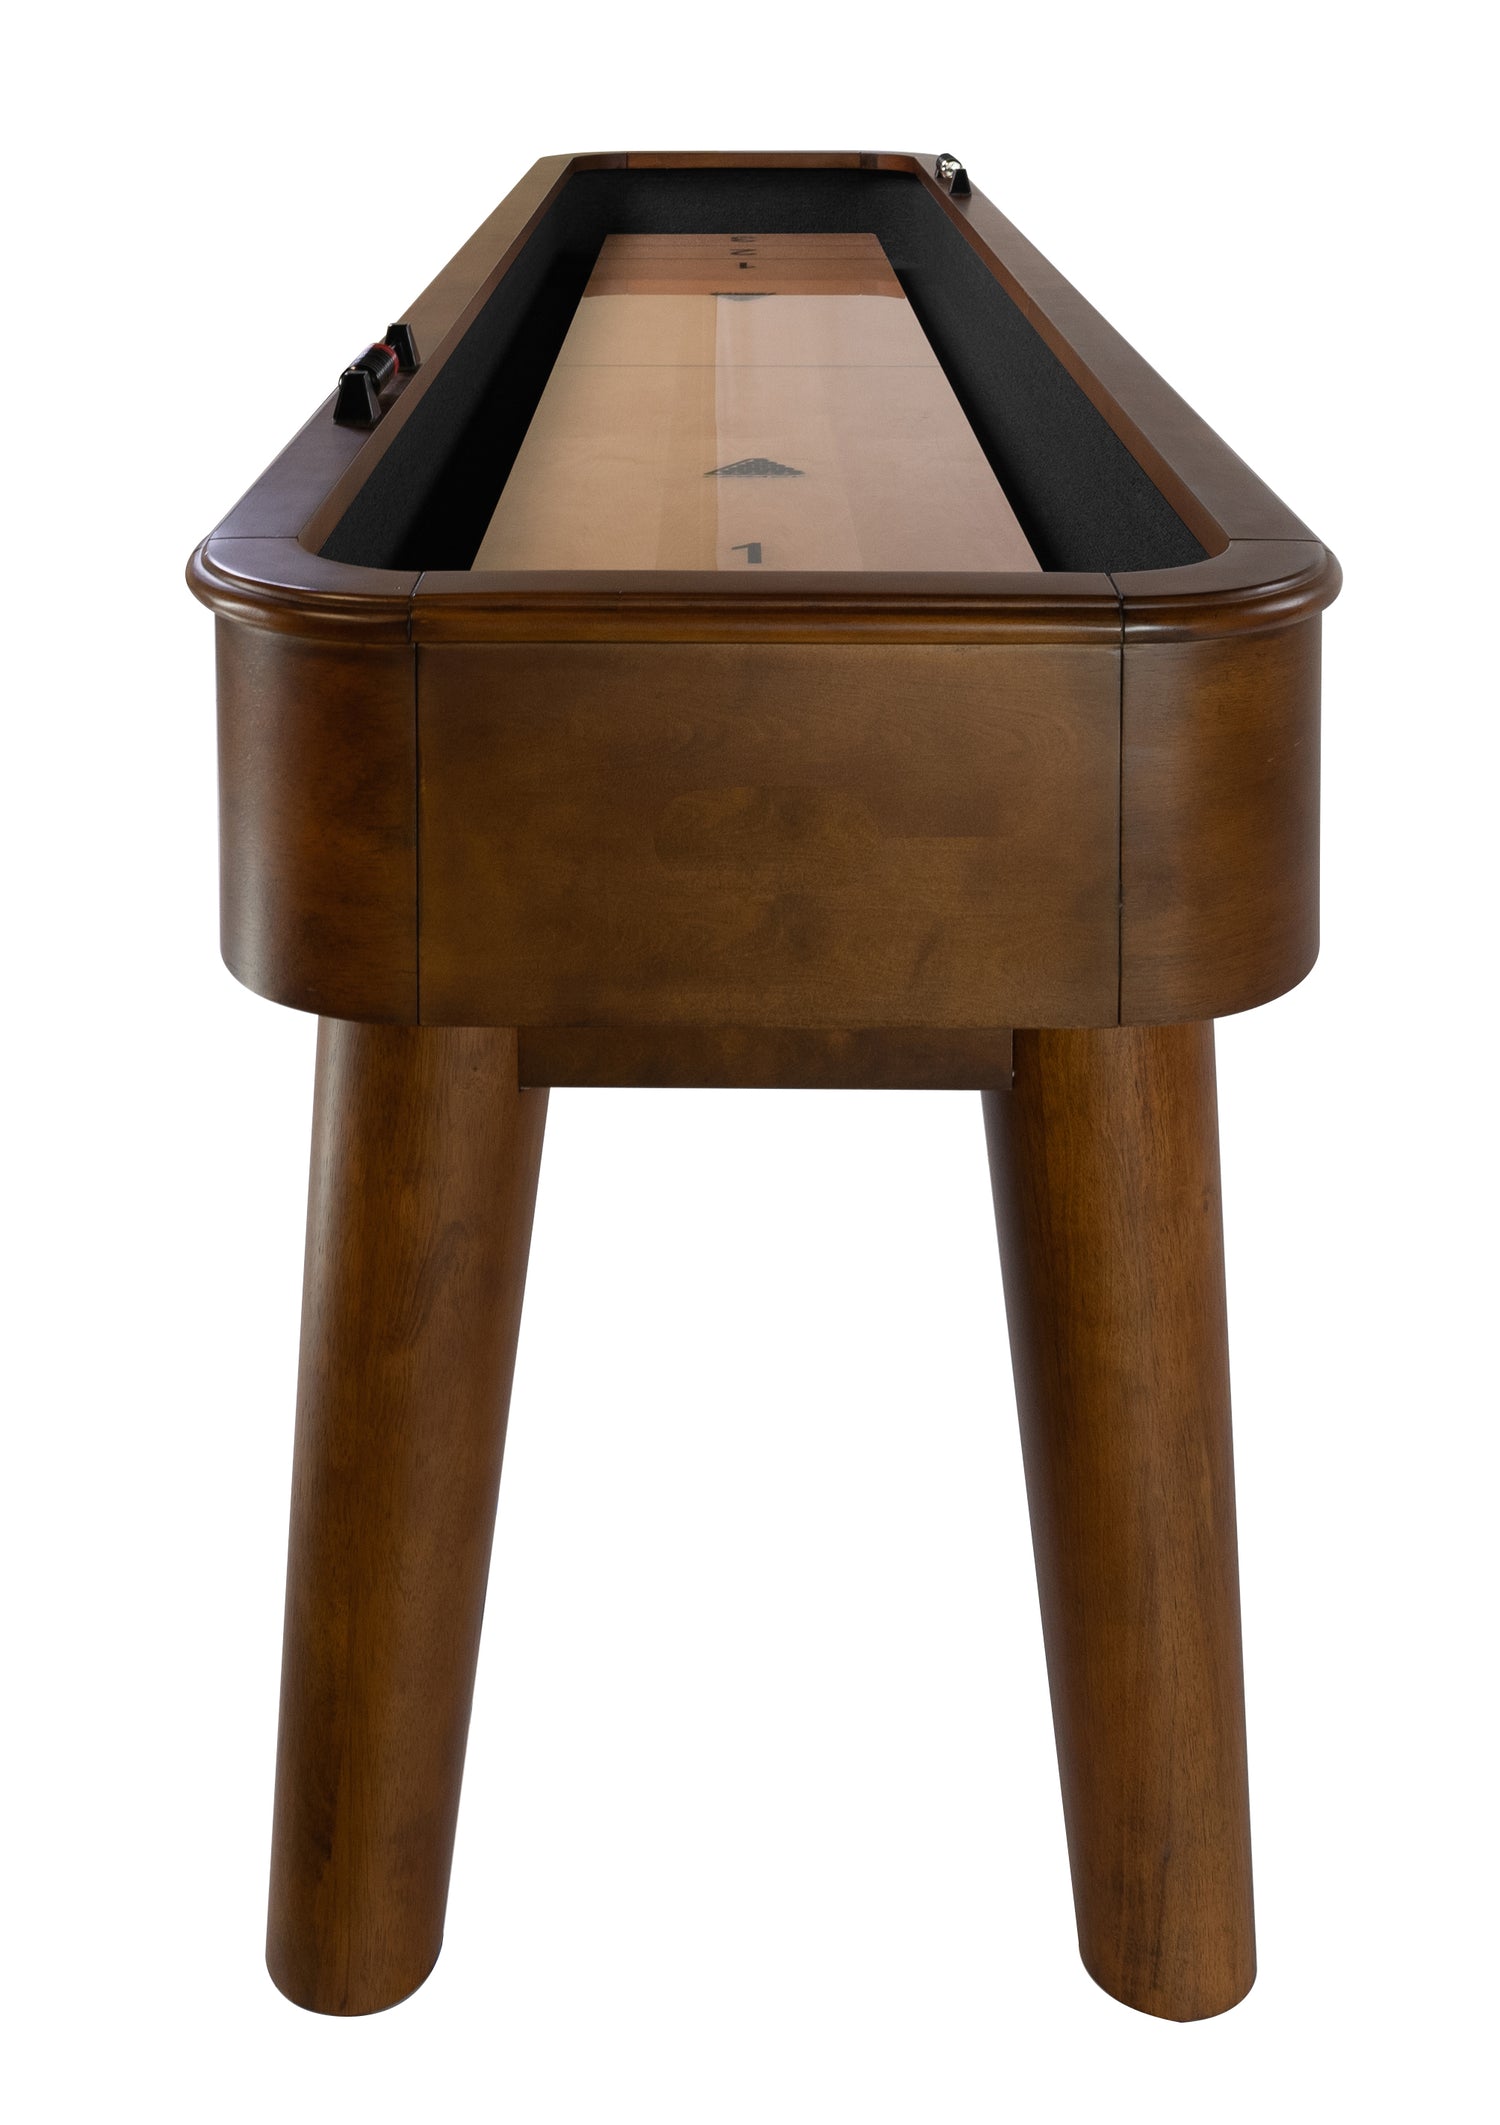 Legacy Billiards Collins 9 Ft Shuffleboard in Nutmeg Finish End View